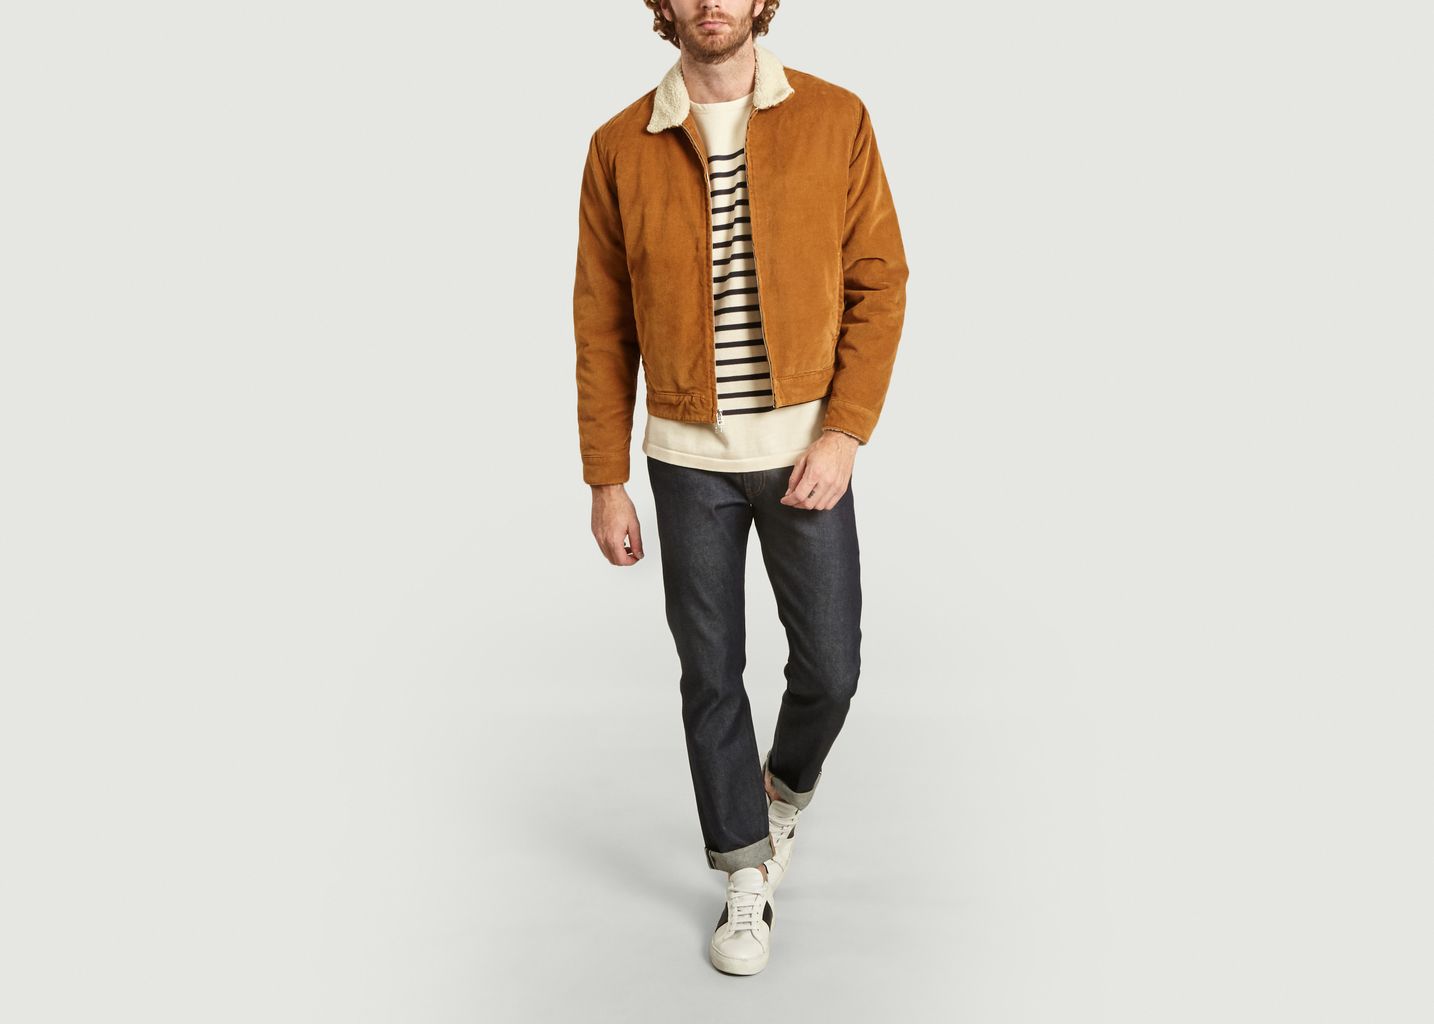 Quilted corduroy jacket with faux-fur collar - Levi's M&C